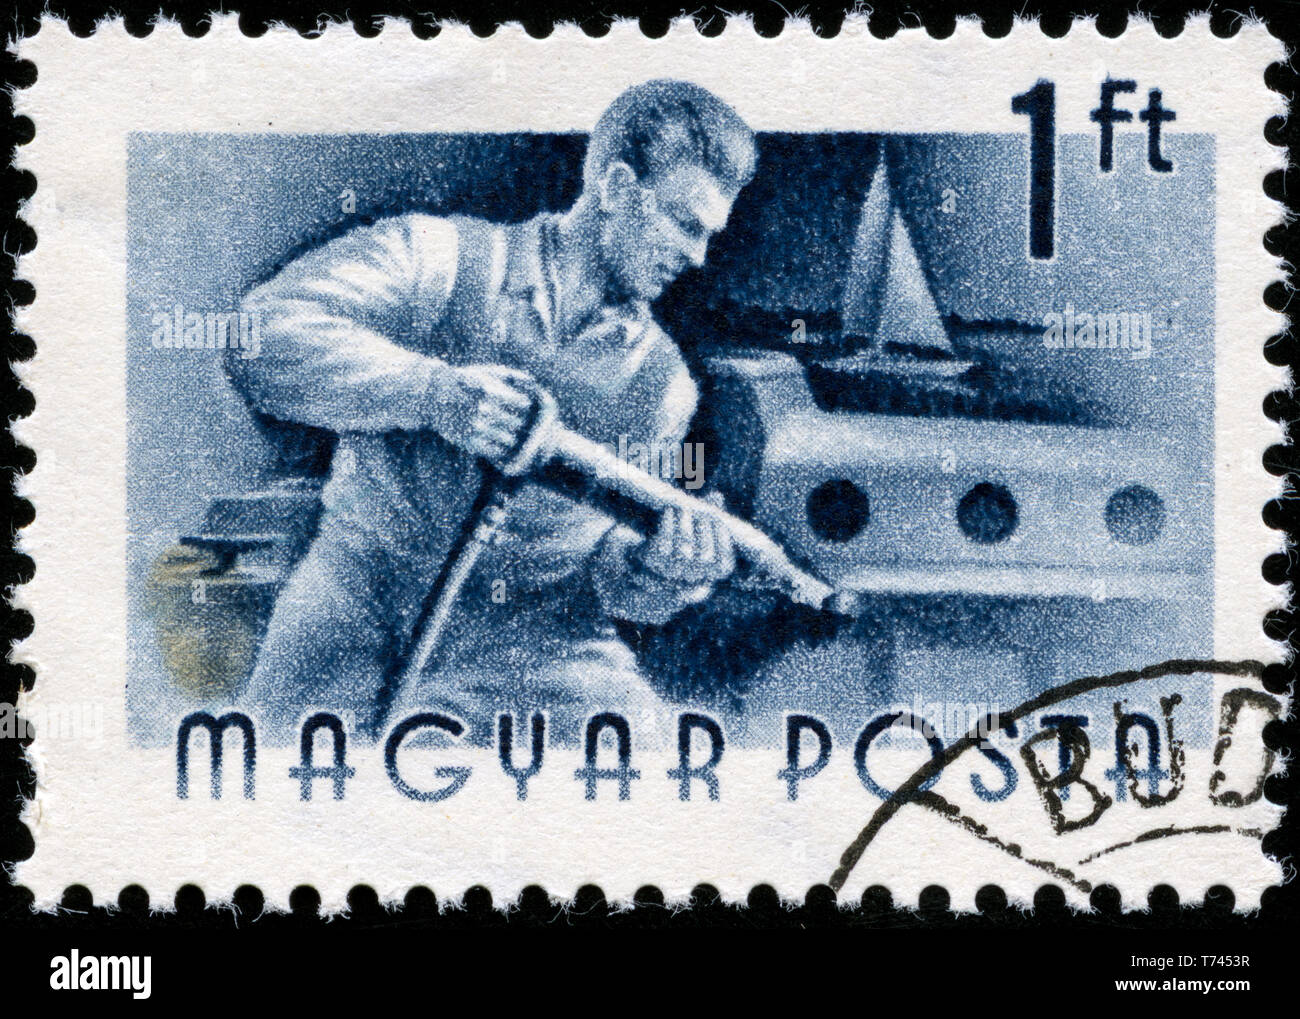 Postage stamp from Hungary in the Hungarian Workers series issued in 1955 Stock Photo